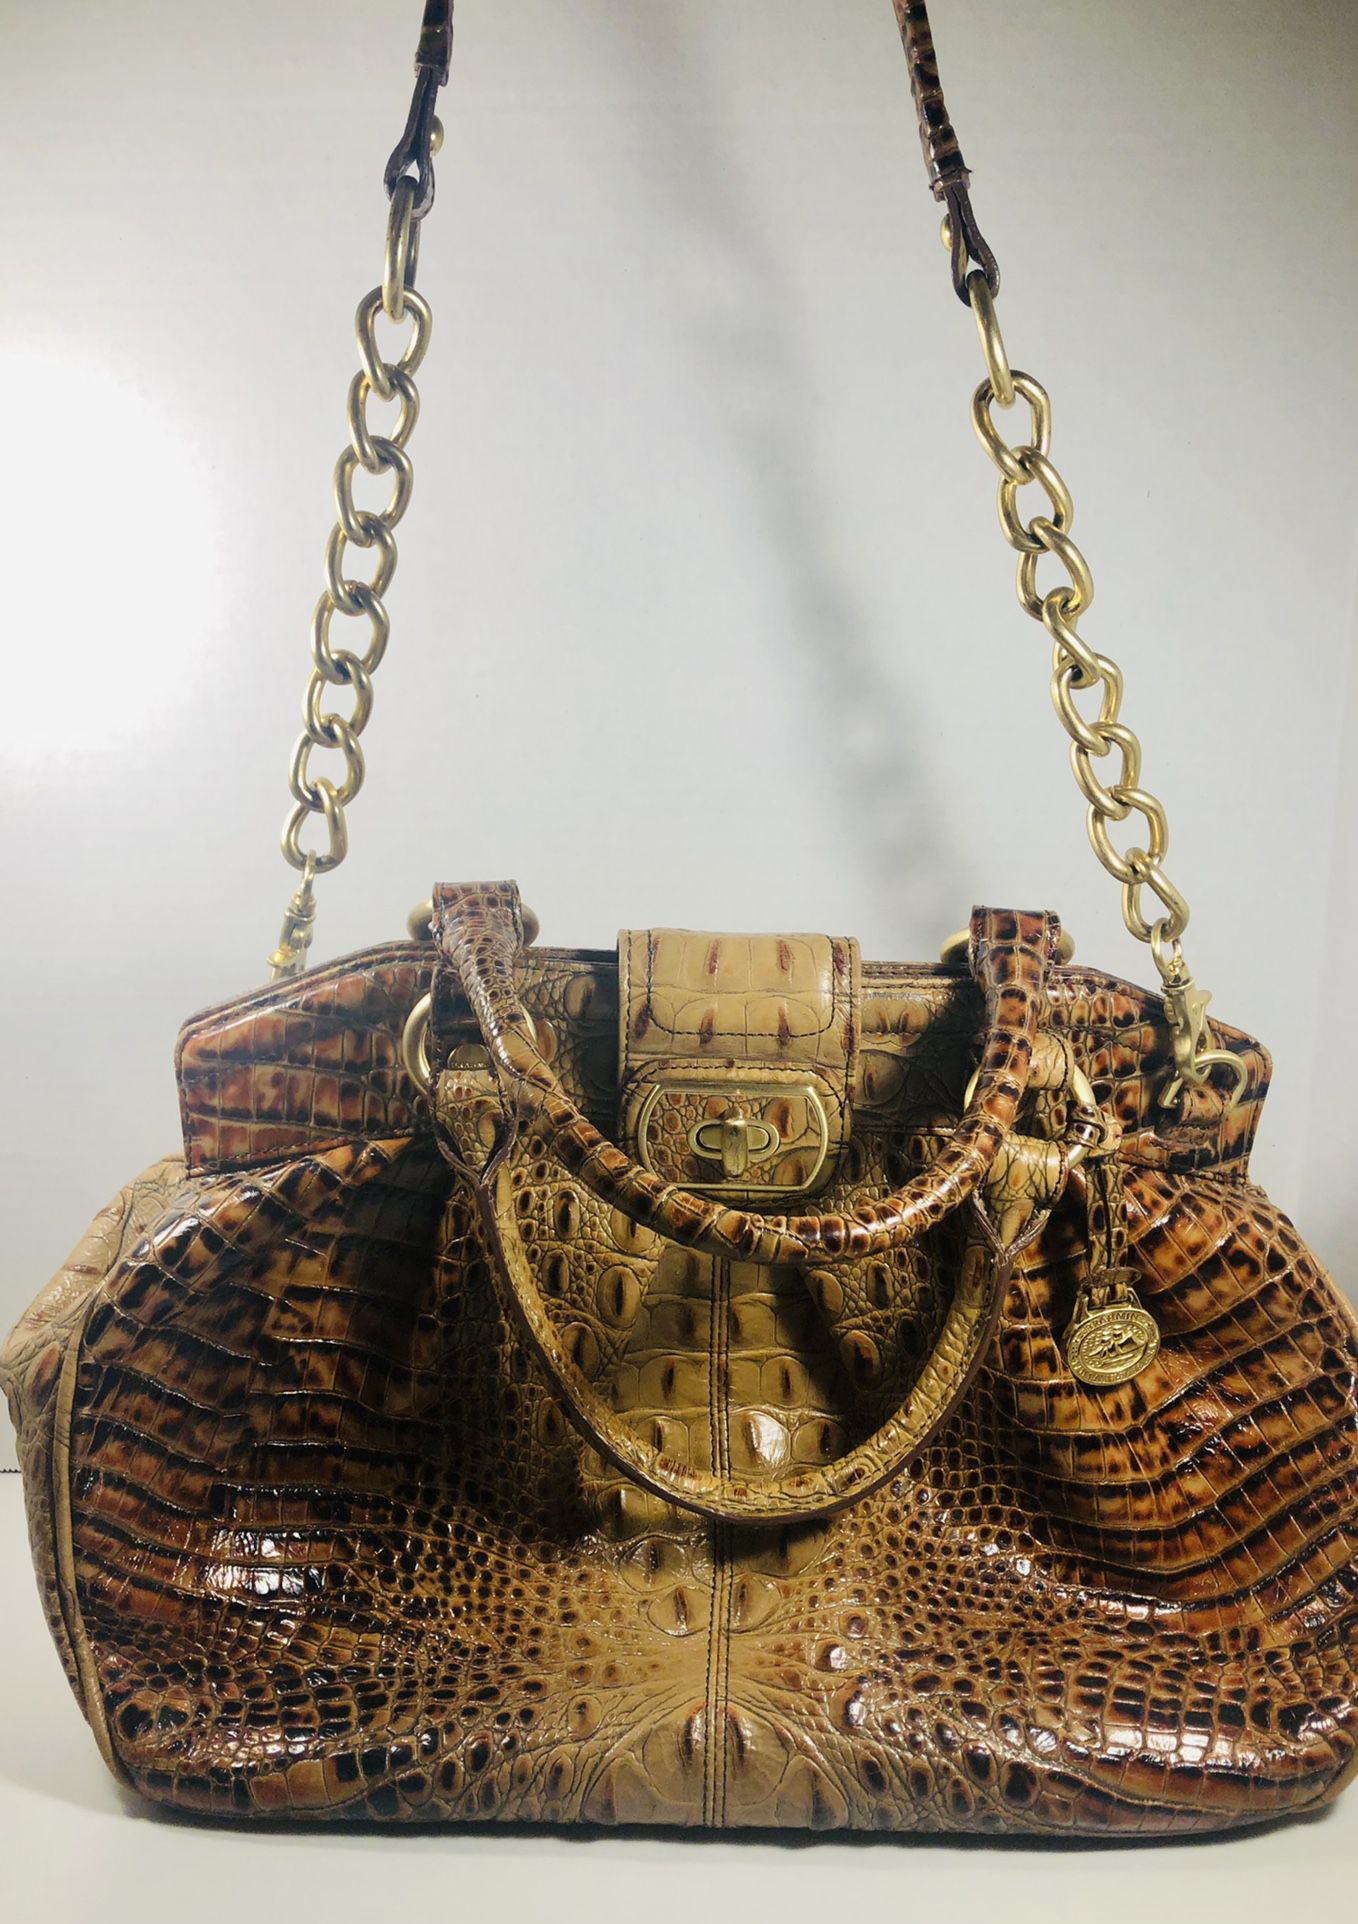 Brahmin Melbourne Toasted Hobo Bag With Handles And Strap